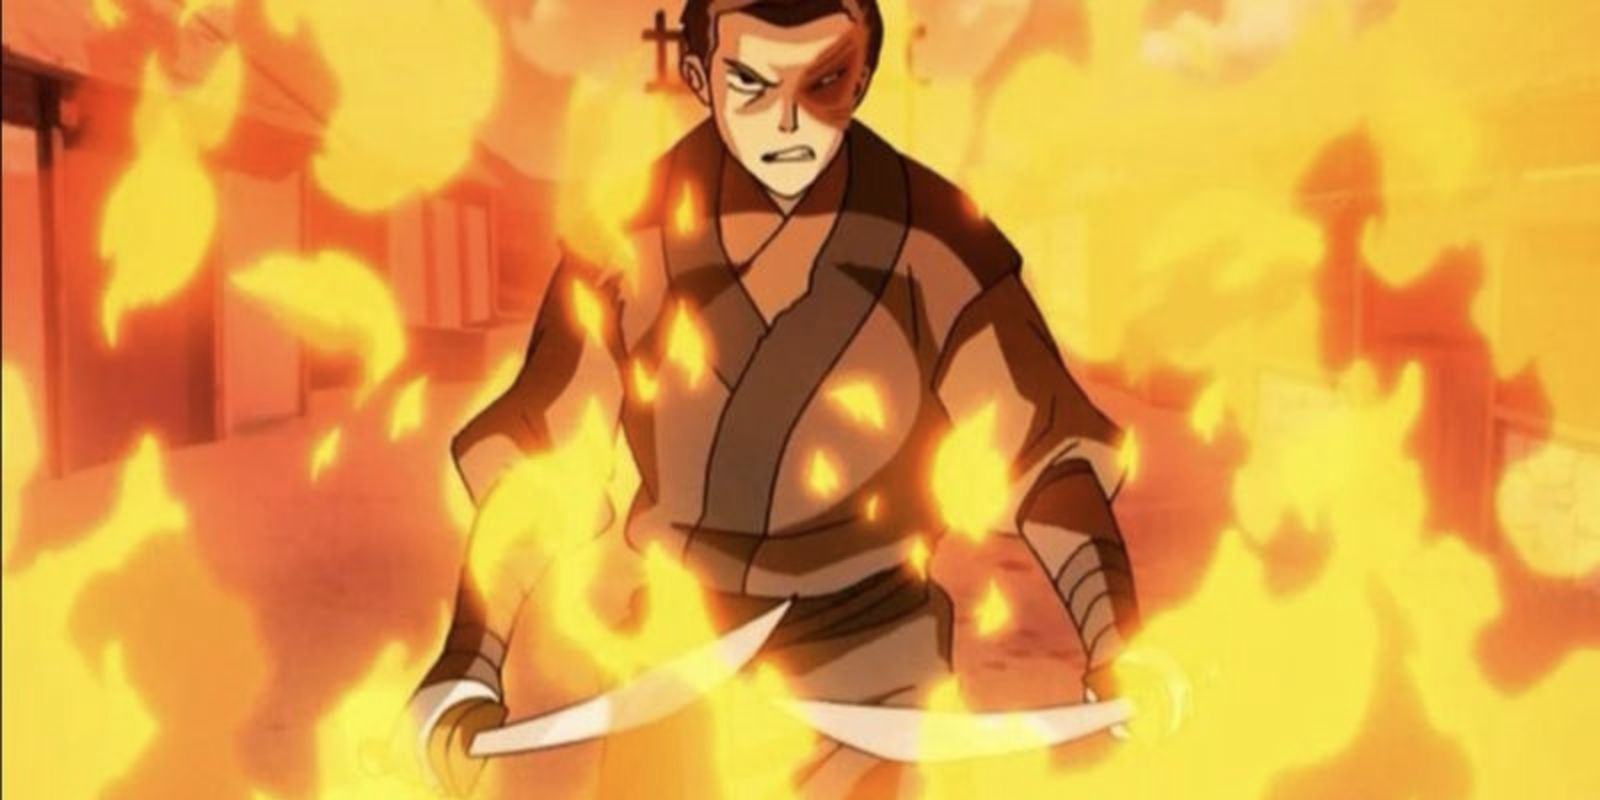 Zuko surrounded by flames in The Last Airbender